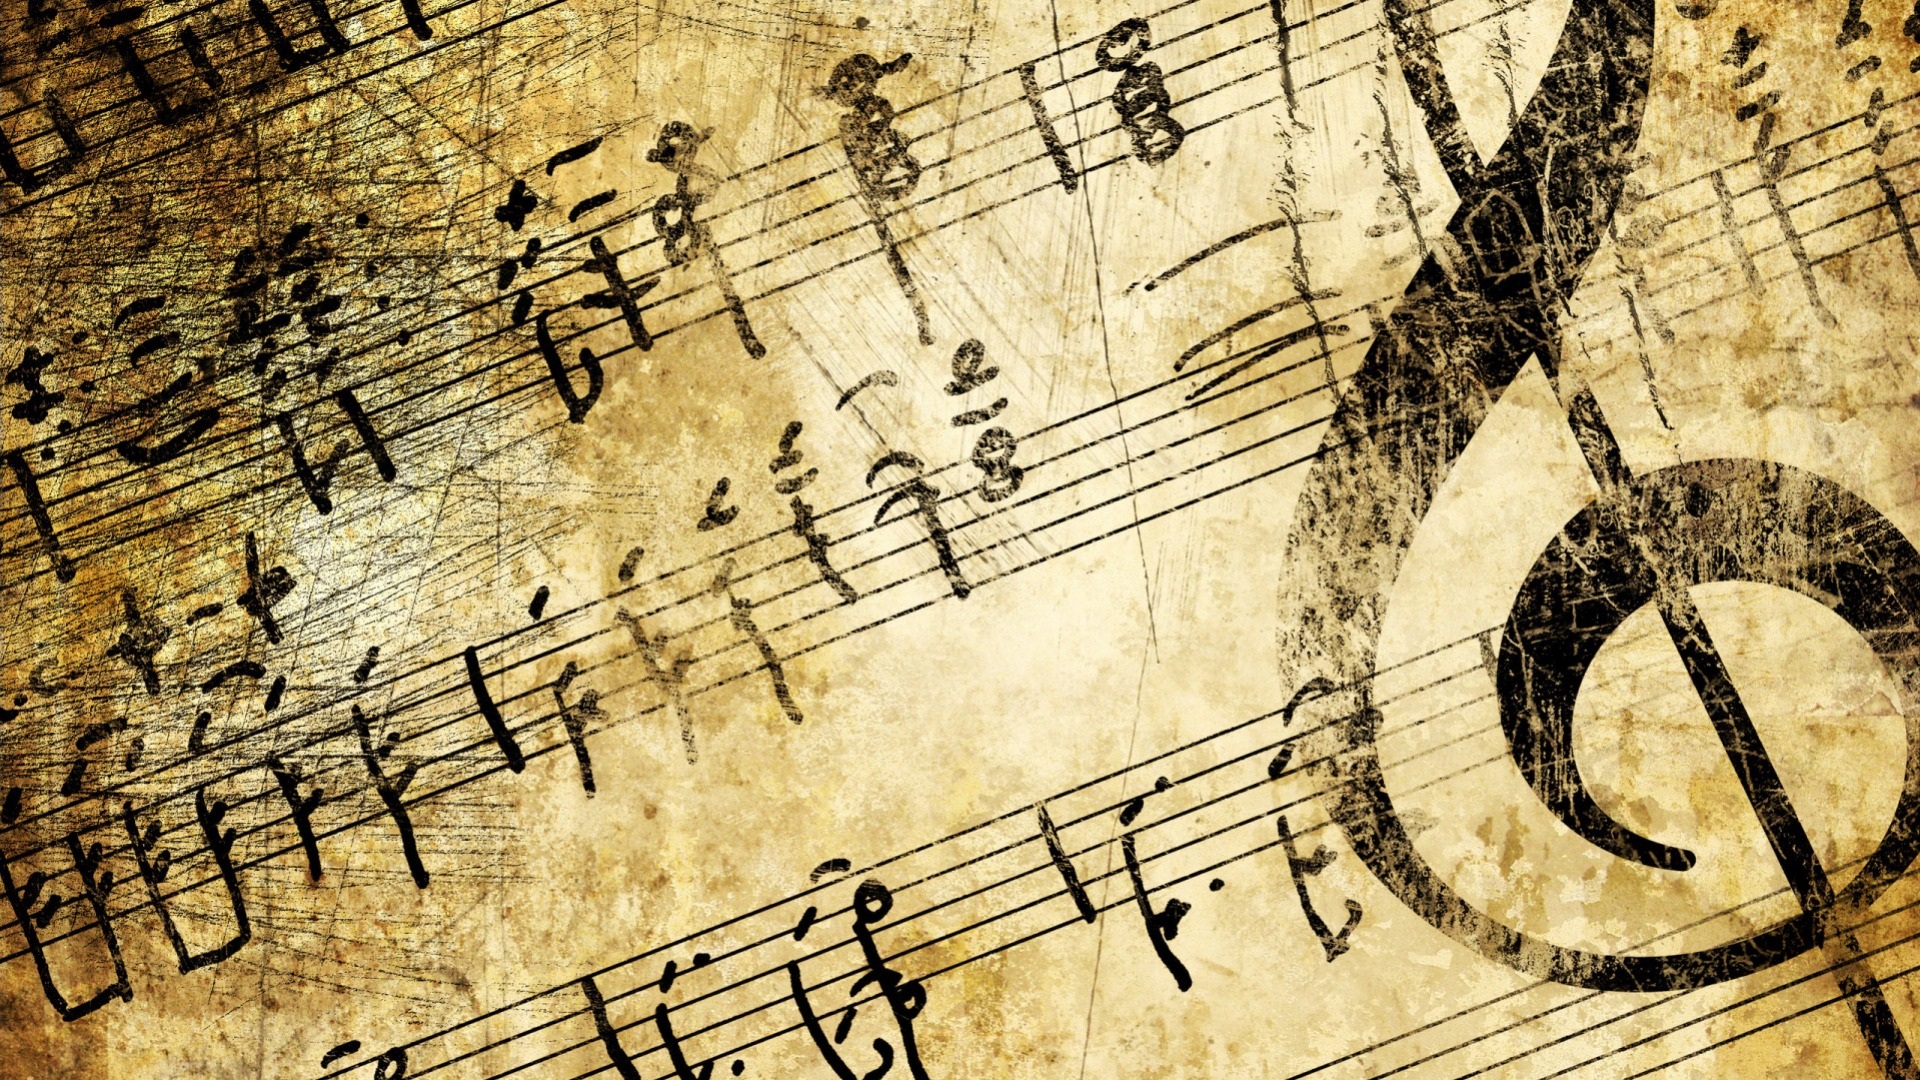 Baroque Music Wallpapers